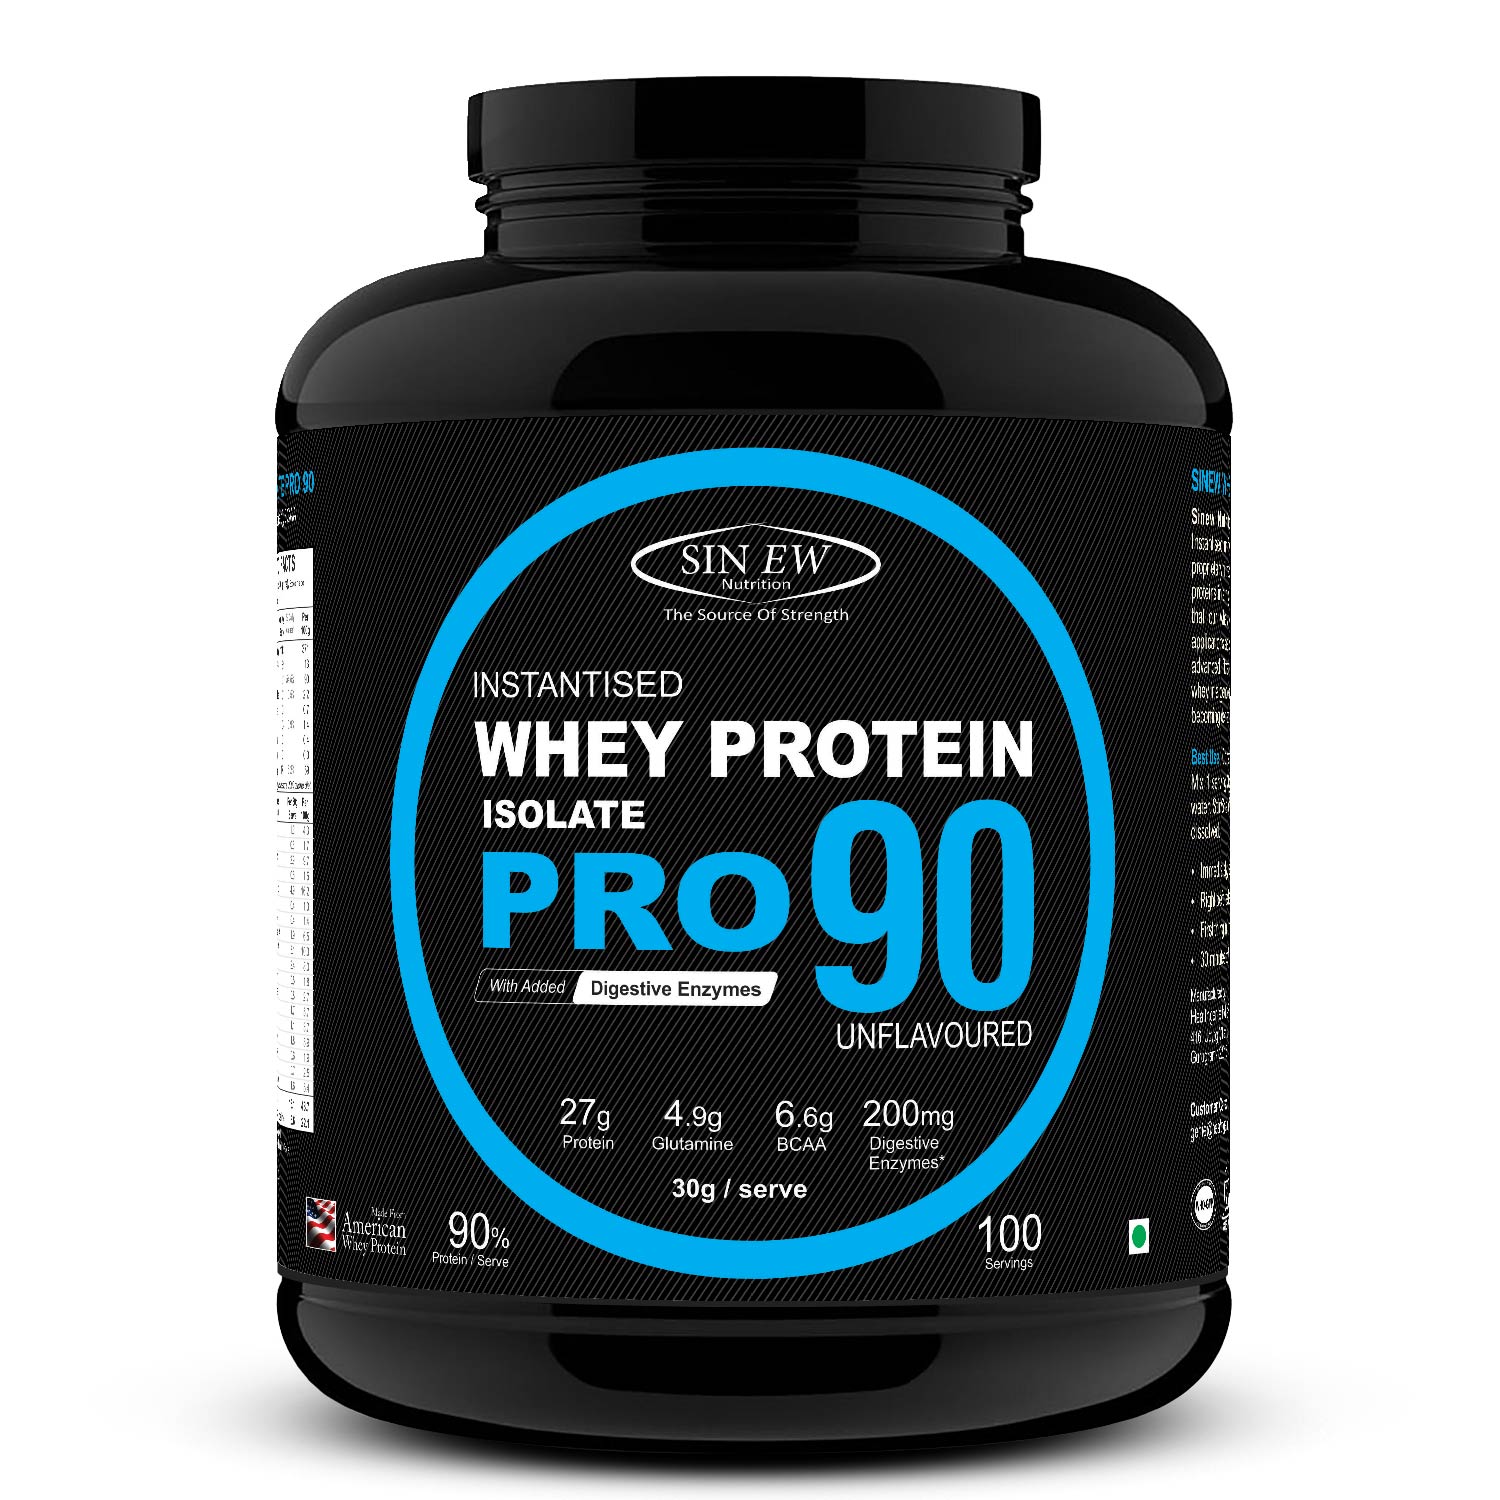 Sinew Nutrition Raw Whey Protein Isolate 90% PRO 3kg